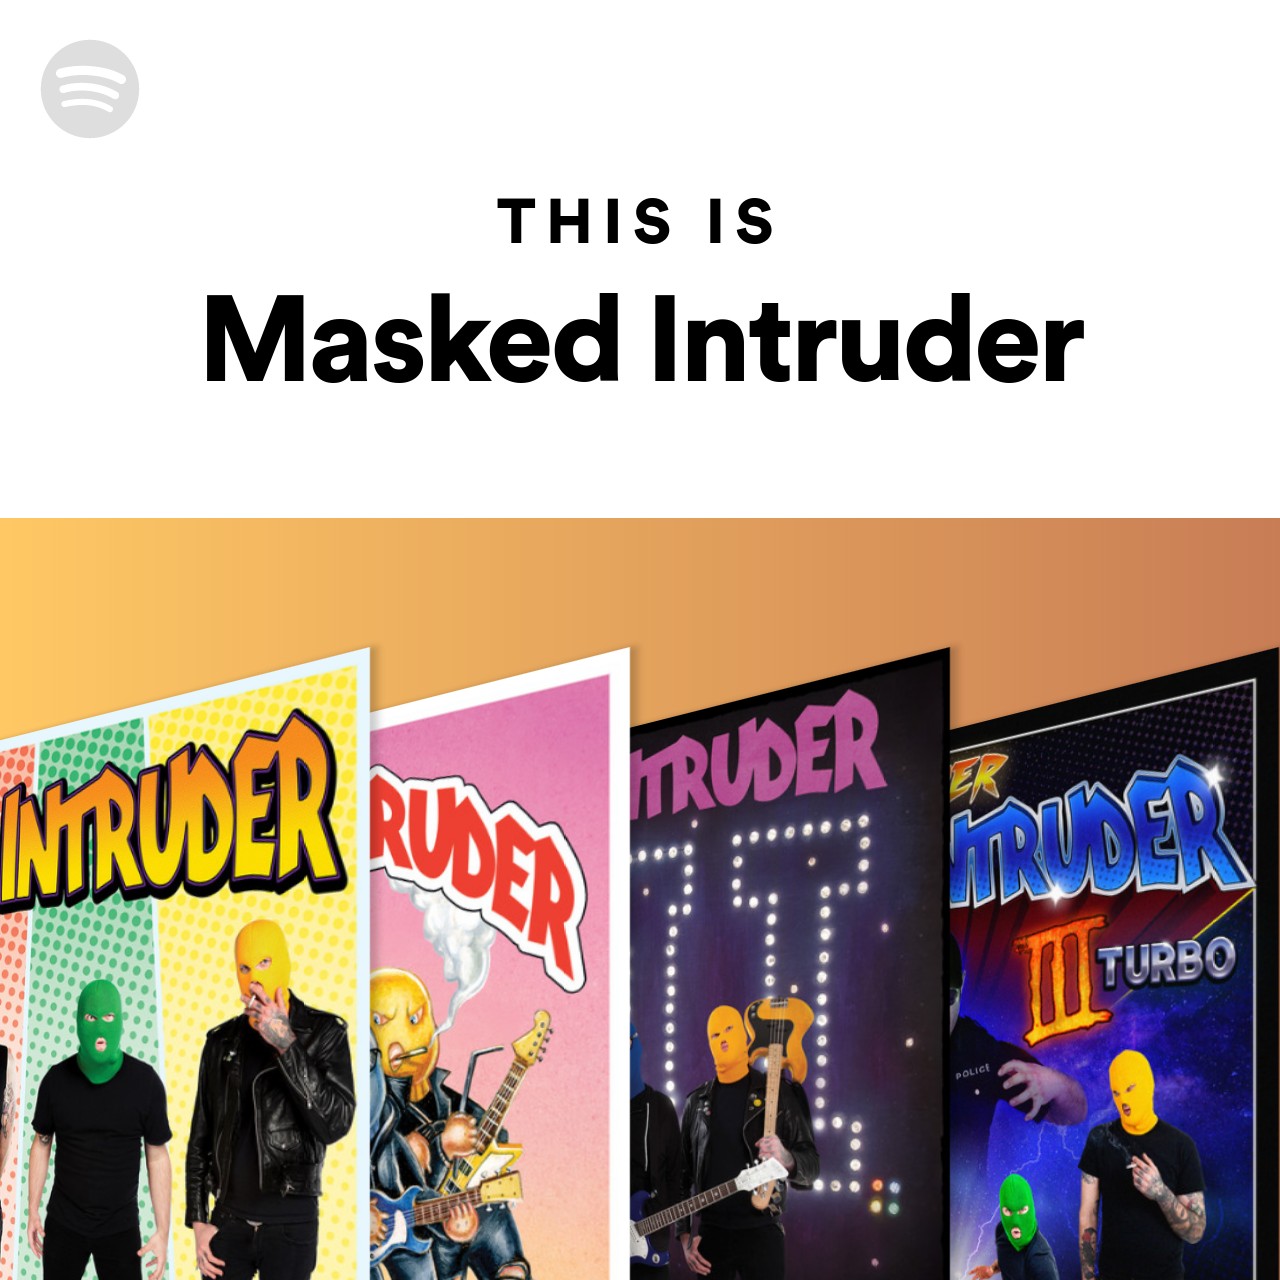 This Is Masked Intruder